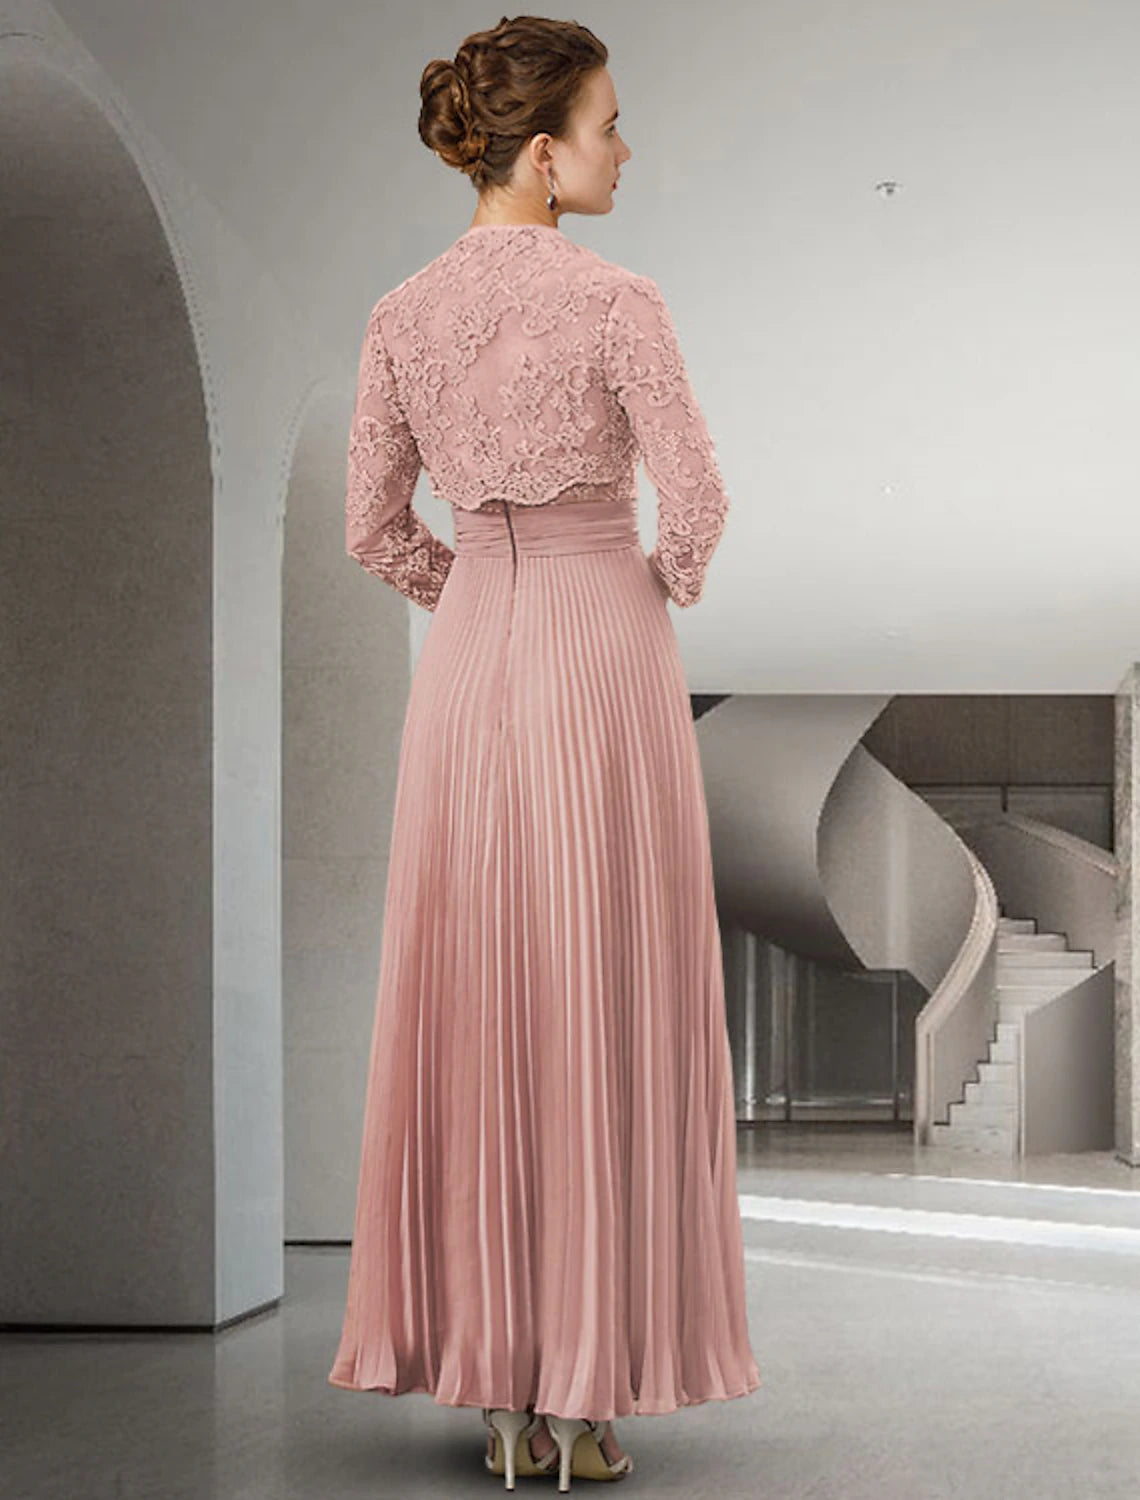 Two Piece A-Line Mother of the Bride Dress Church Elegant Sweetheart Floor Length Chiffon Lace Long Sleeve Wrap Included with Pleats Appliques